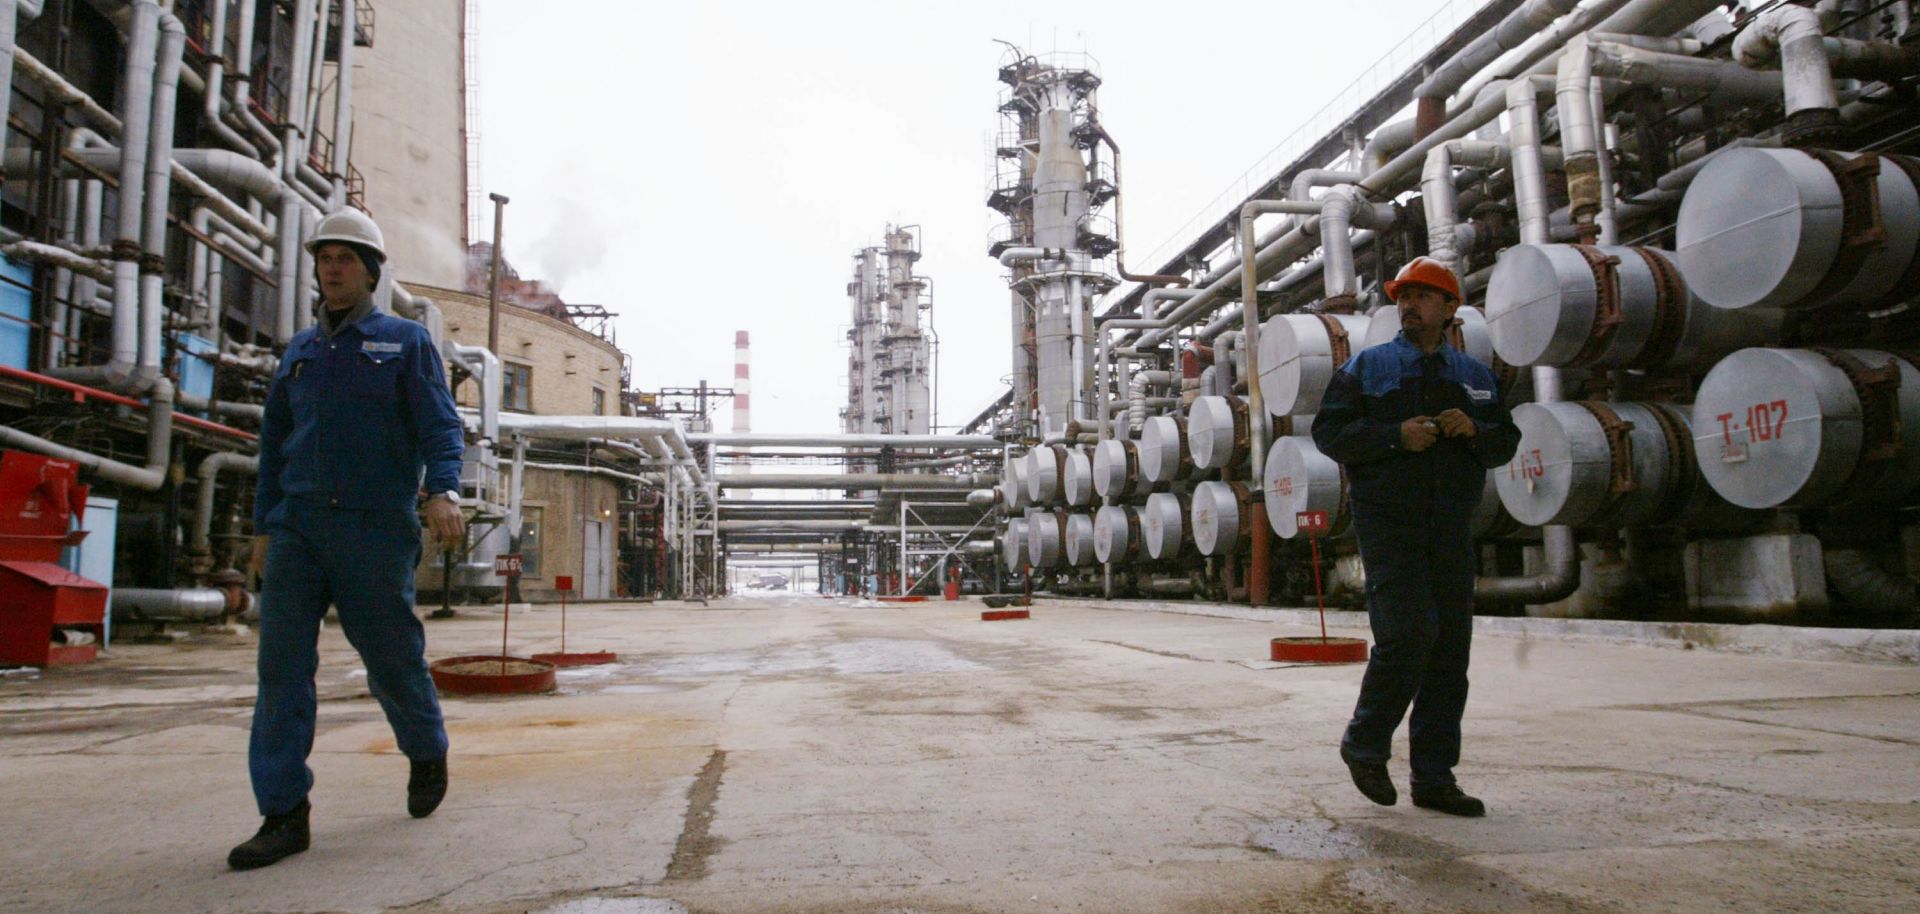 Workers walk through an oil refinery.